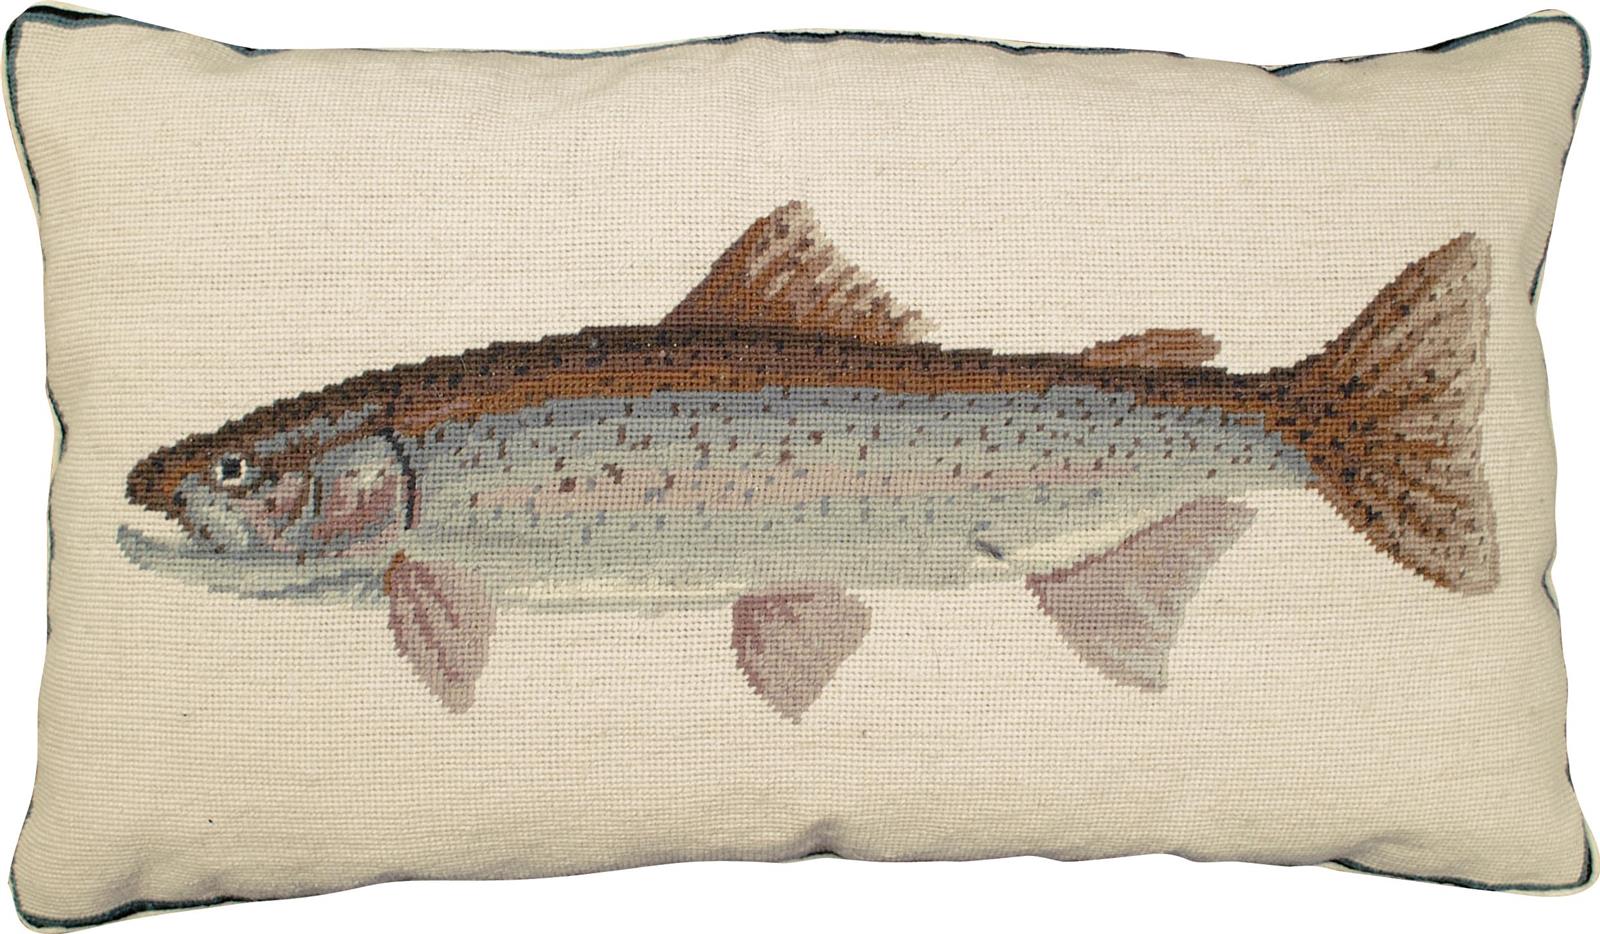 Throw Pillow Needlepoint Rainbow Trout Fish 16x28 28x16 Green Silvery Blue-Image 1